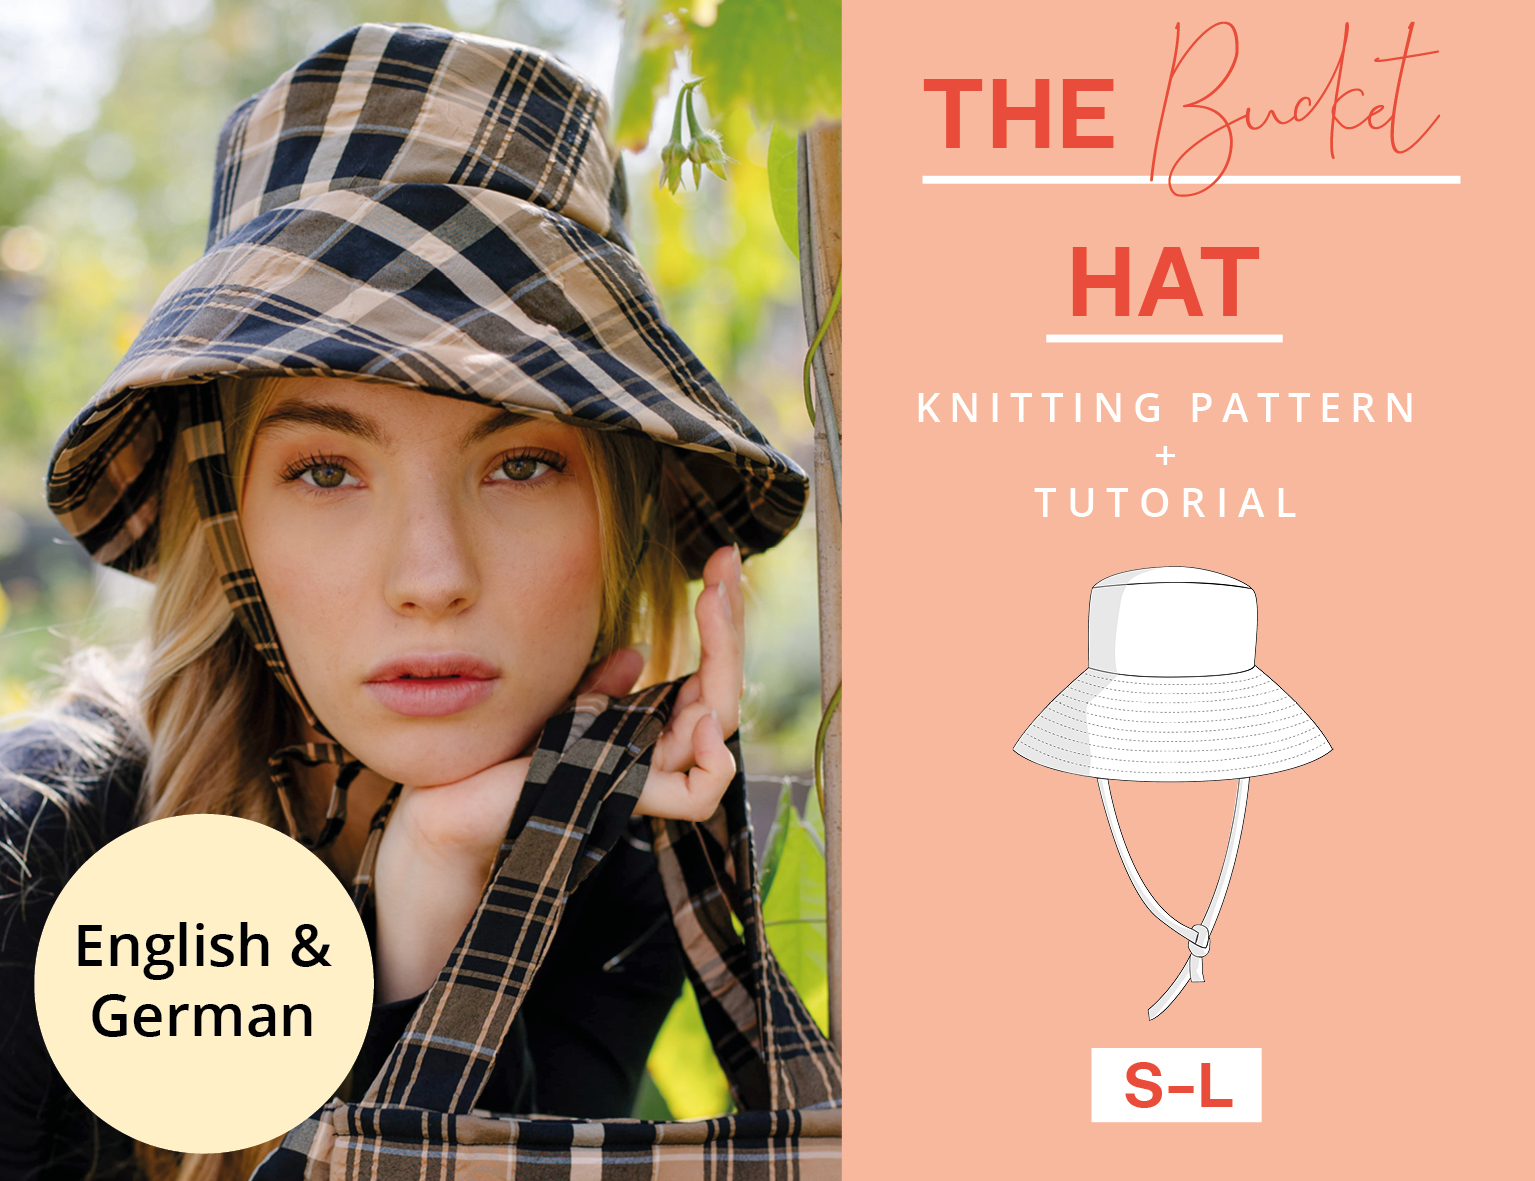 easy patterns to sew hat